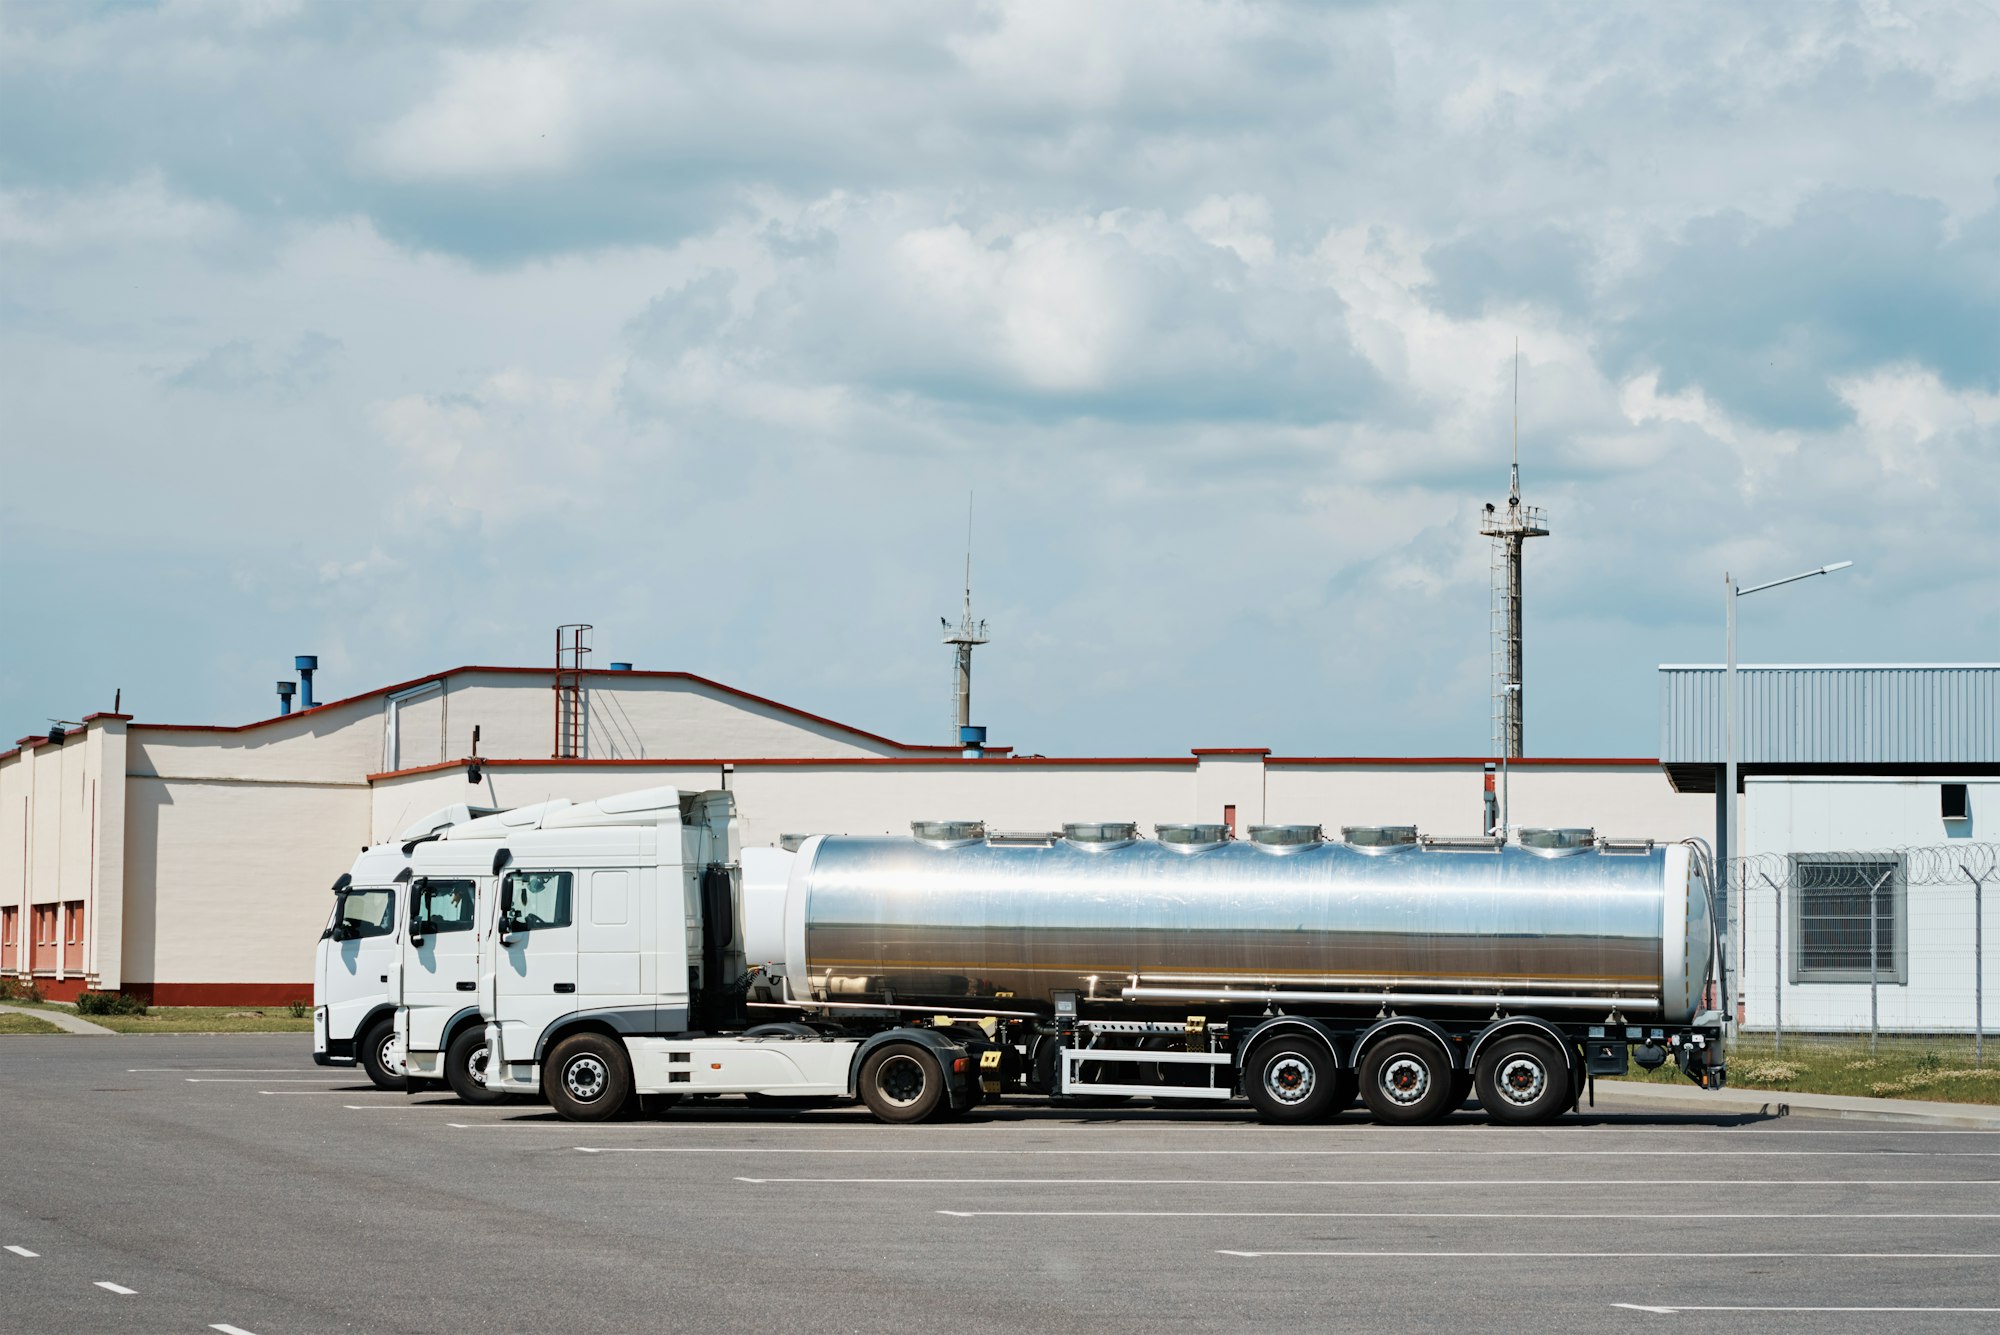 Trucks with tank trailer on parking lot